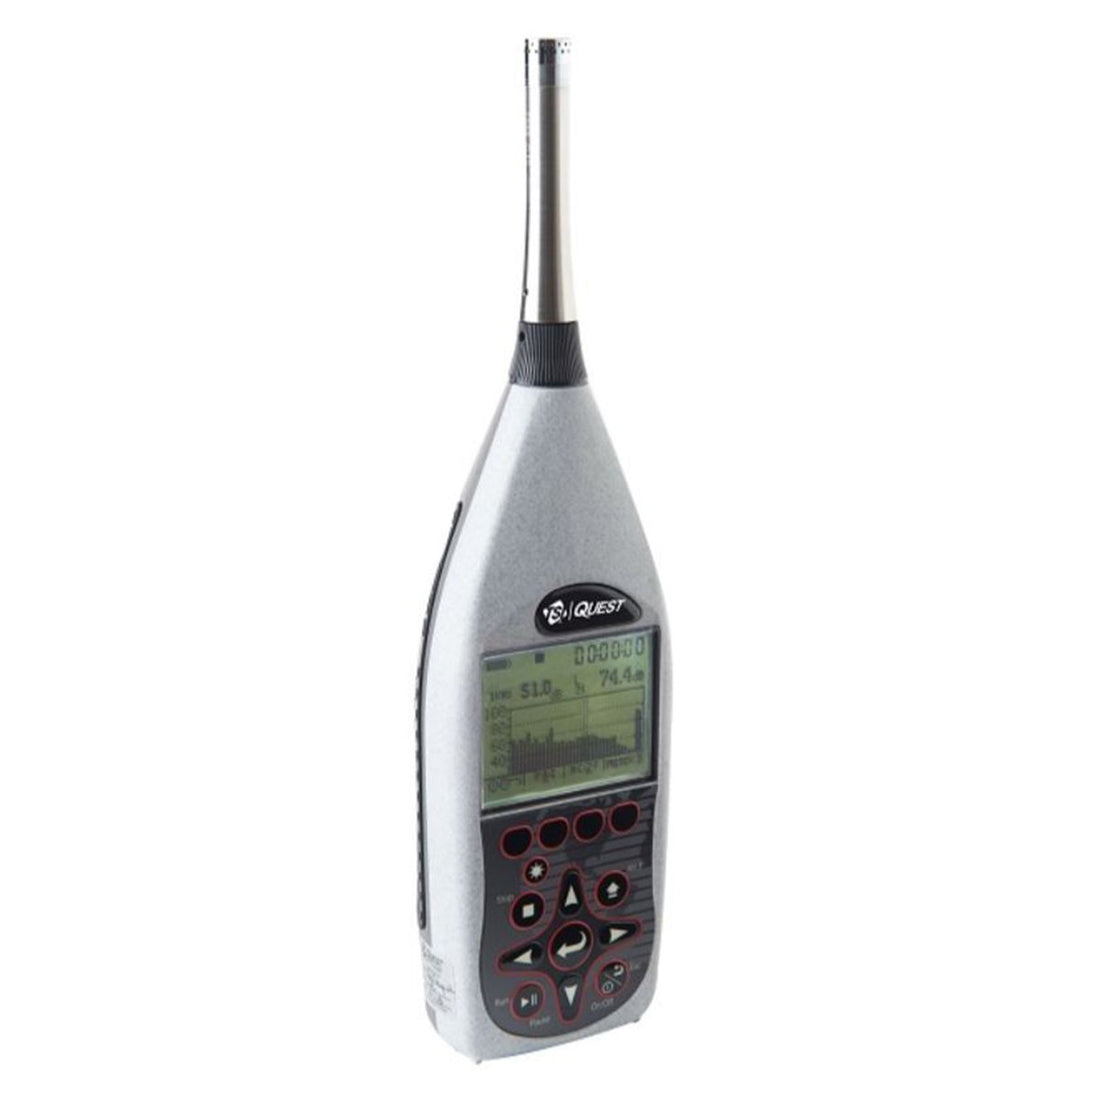 TSI Quest SoundPro DL-2 Sound Level Meter, with 1/1 Octave Band Filter